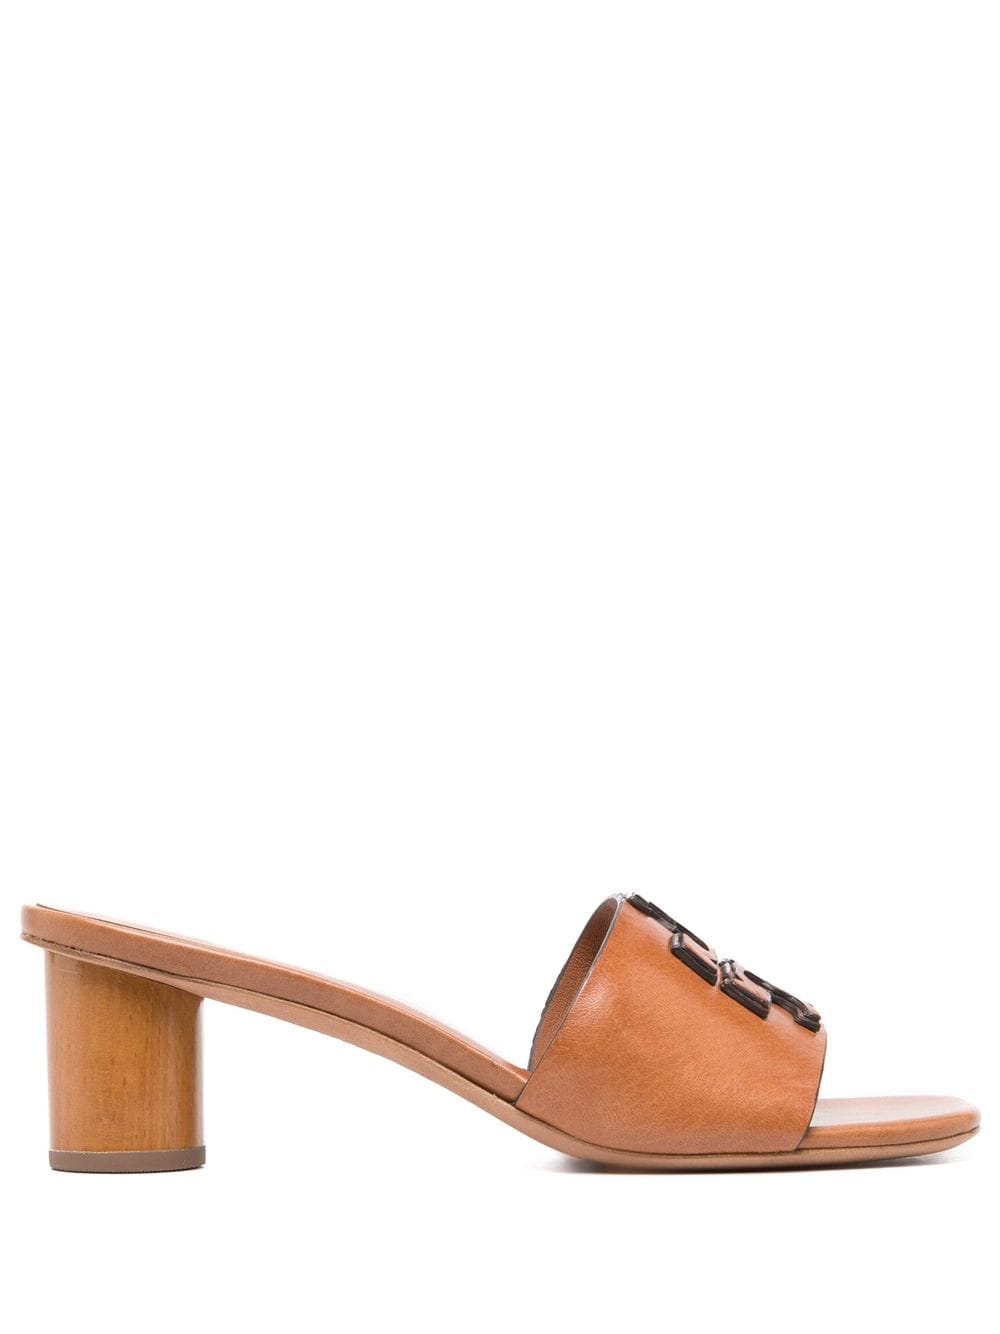 Tory Burch Ines Leather Logo Mule Sandals In Tan | ModeSens